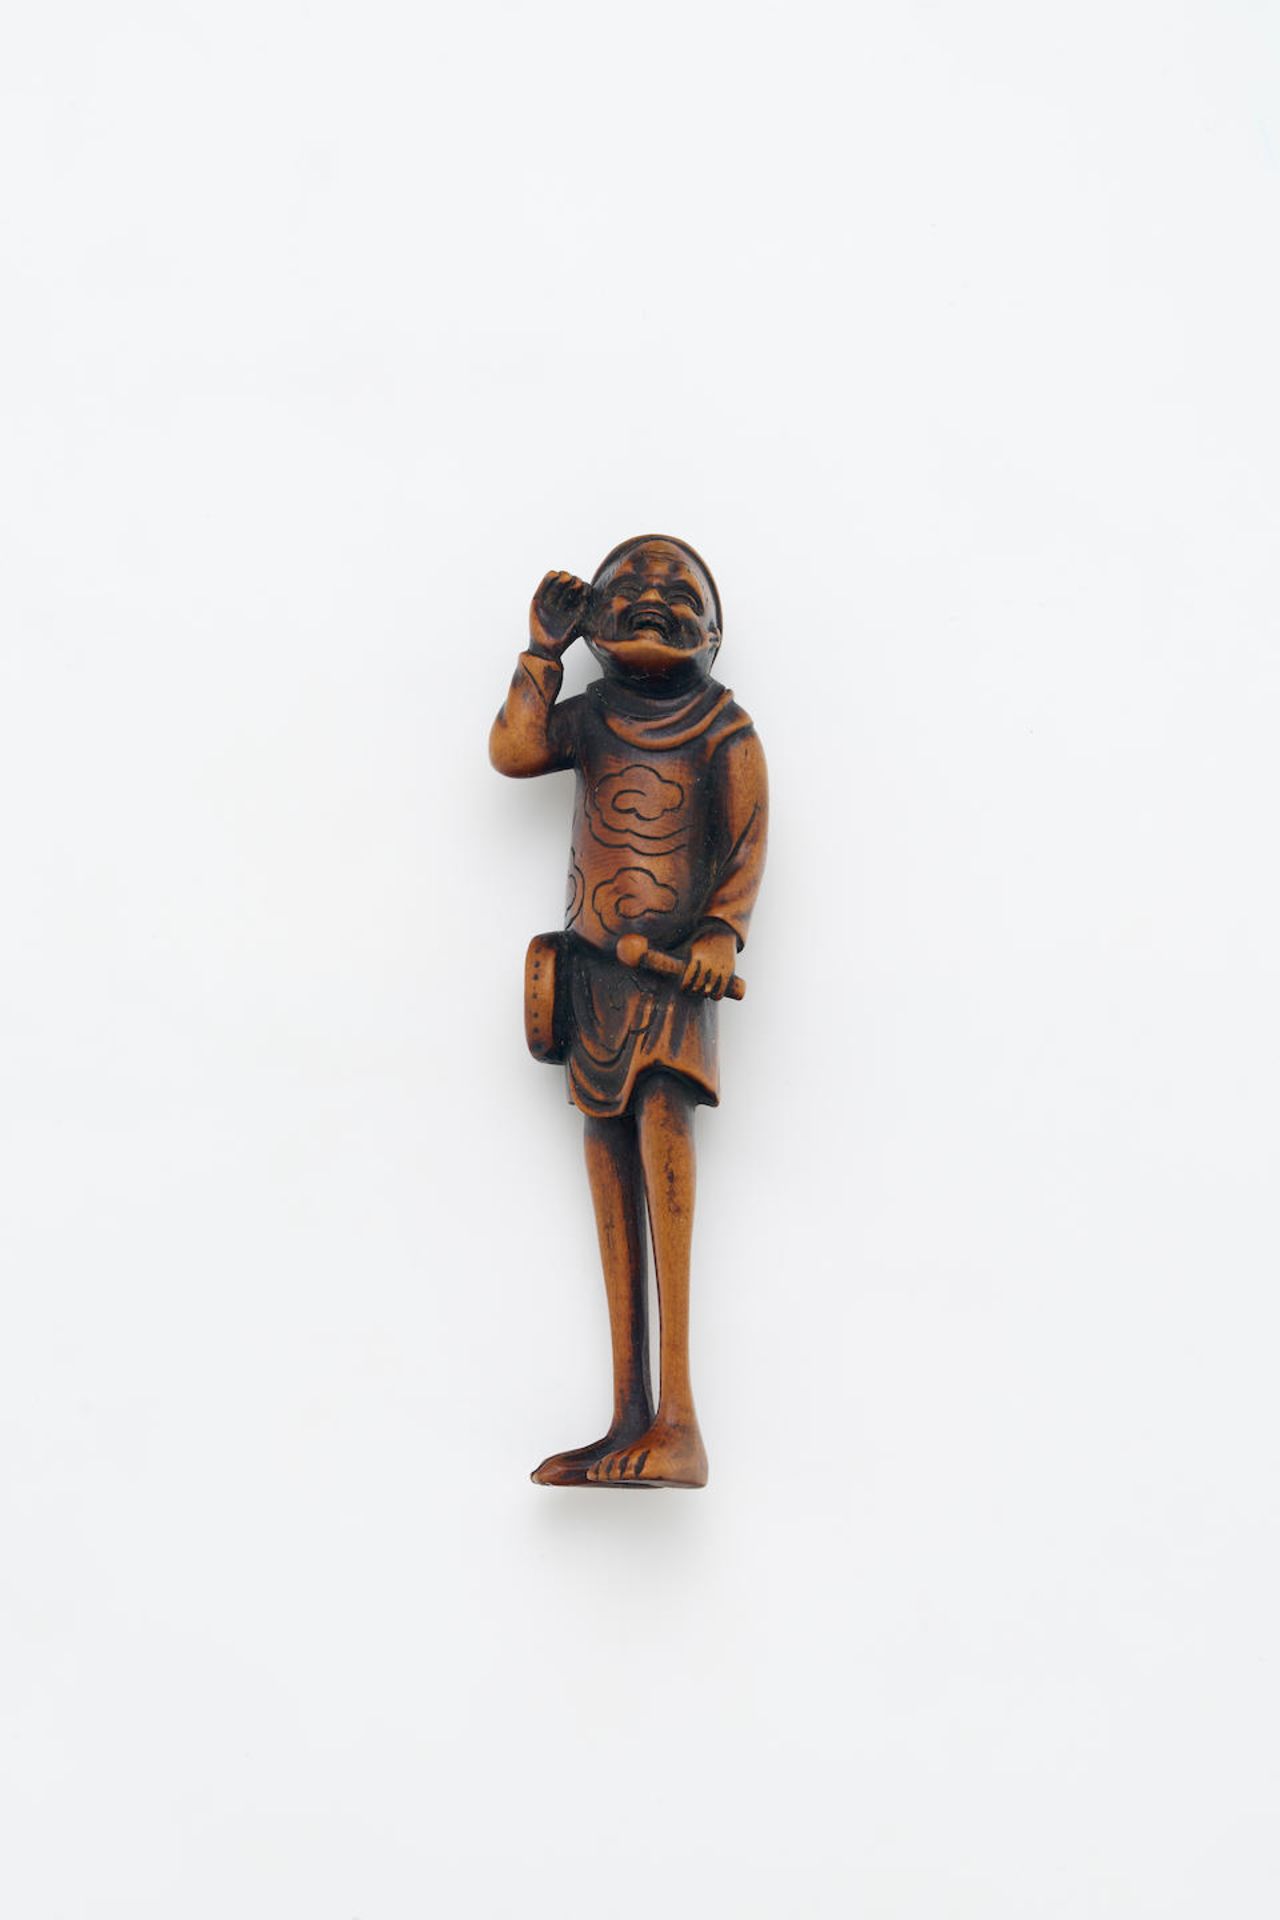 A WOOD NETSUKE OF A FOREIGNER Meiji Period, 19th Century